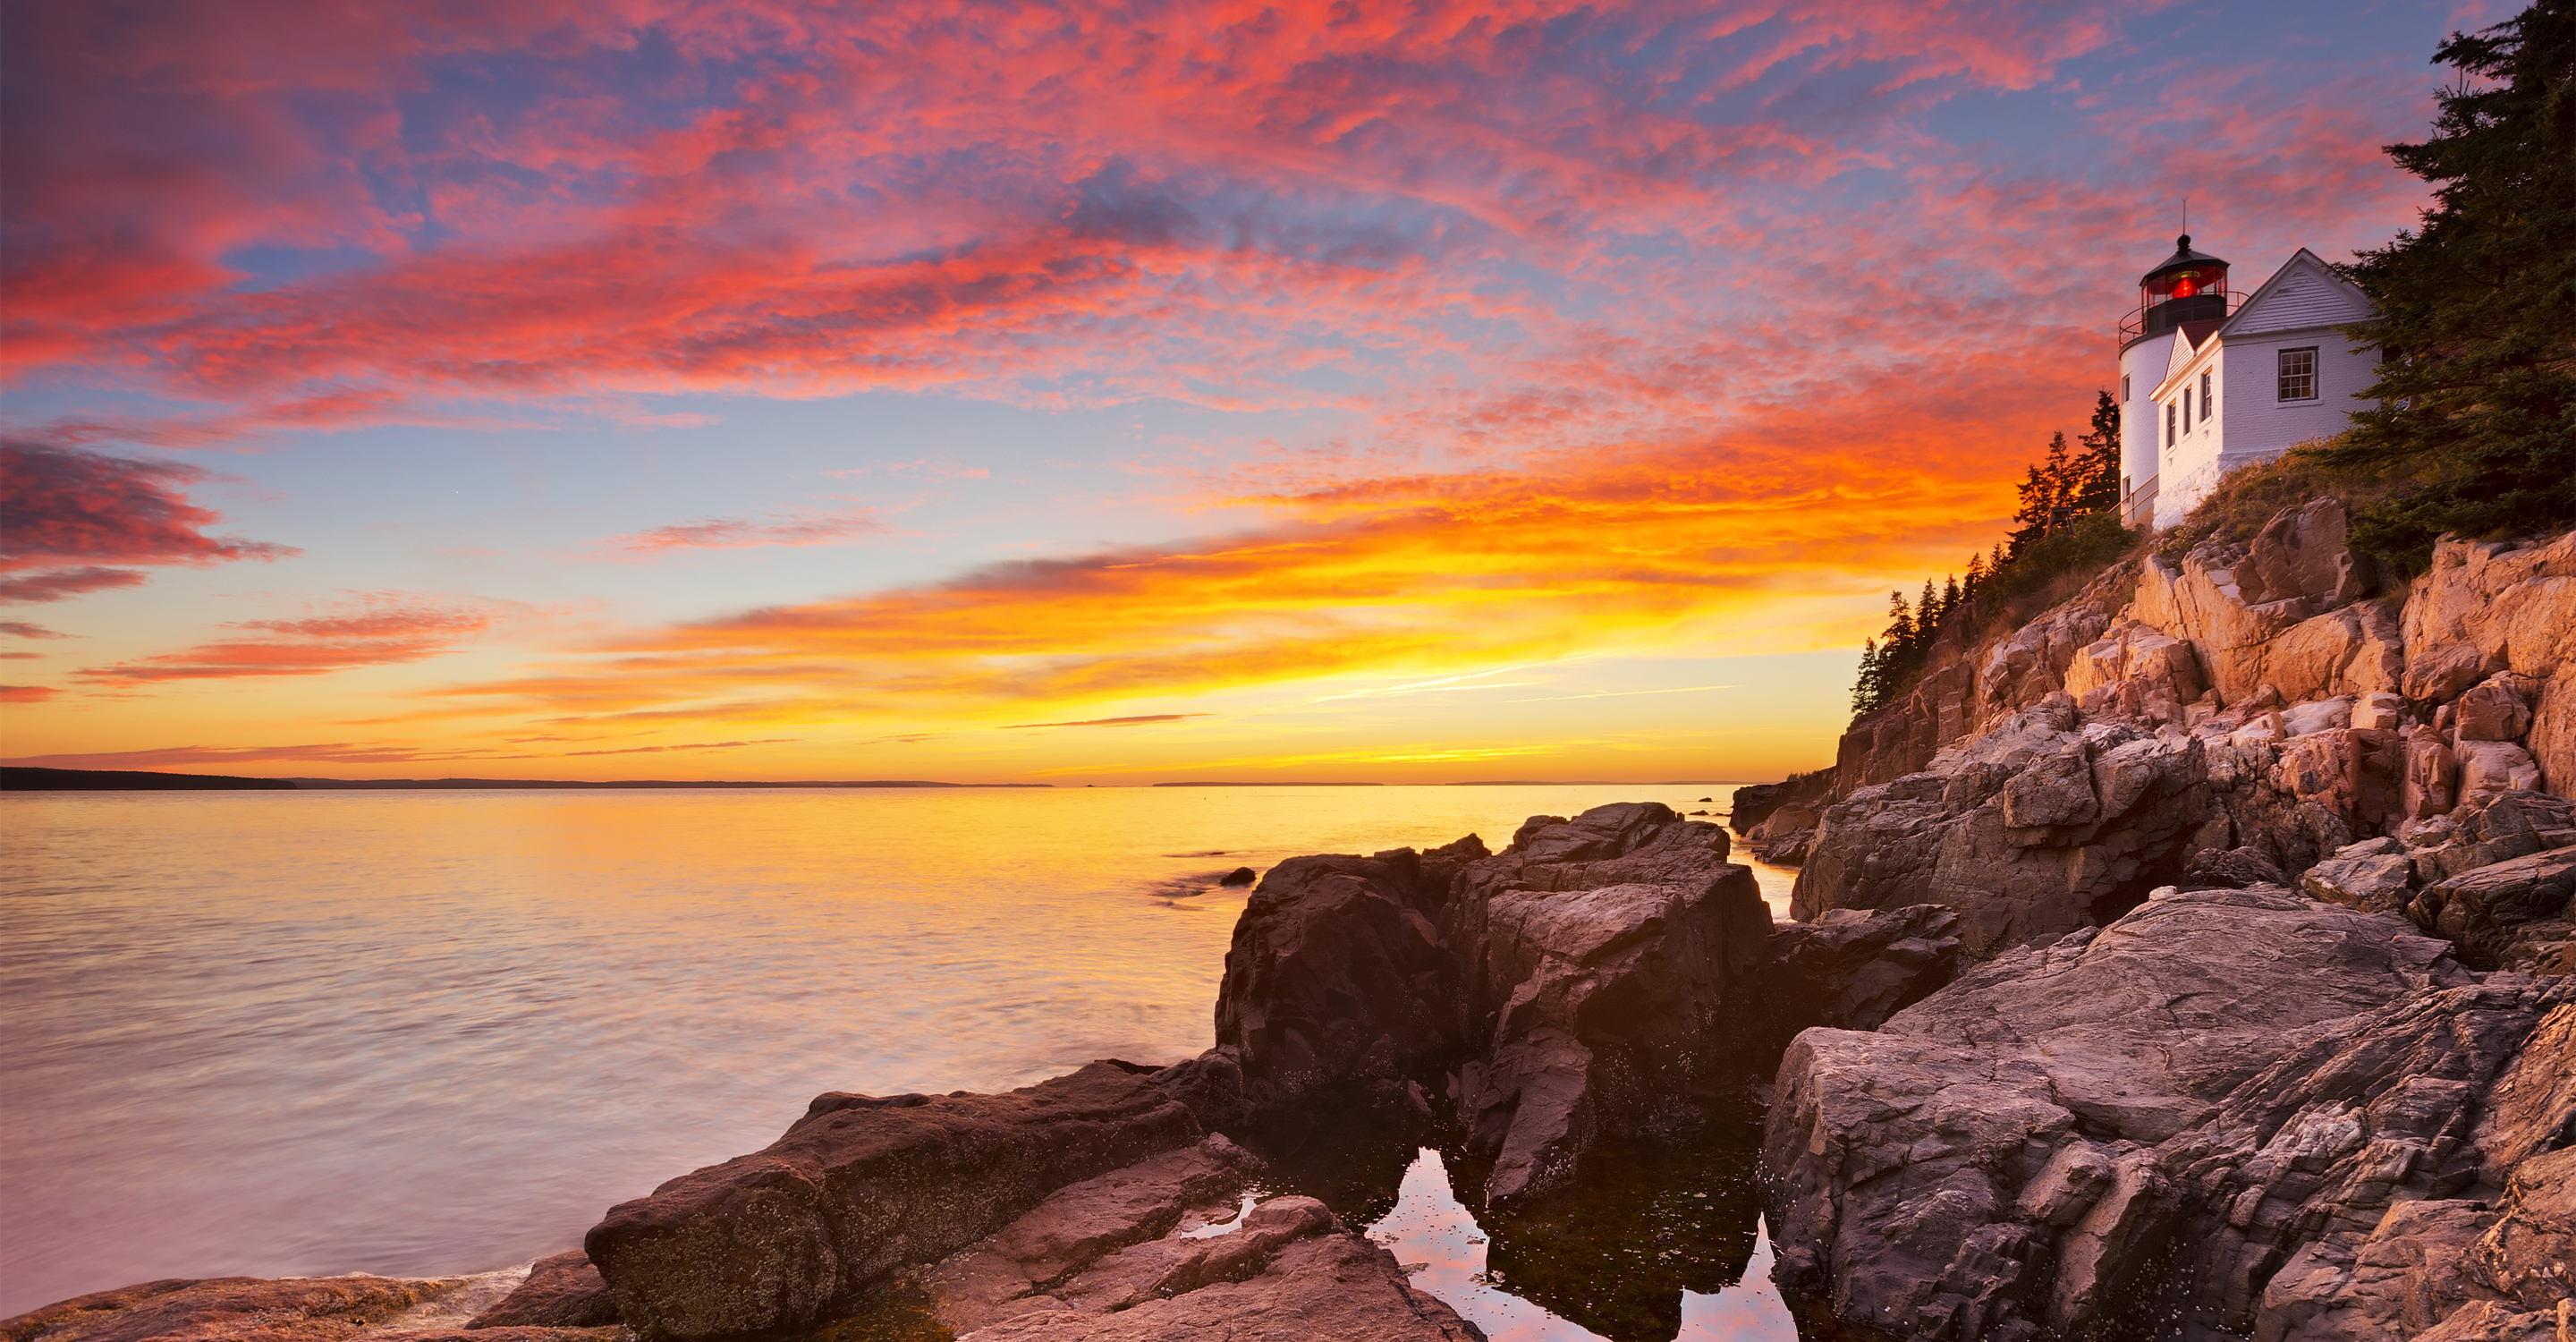 Sunset at the Bass Harbor Head Lighthouse in Acadia National Park, Maine, USA